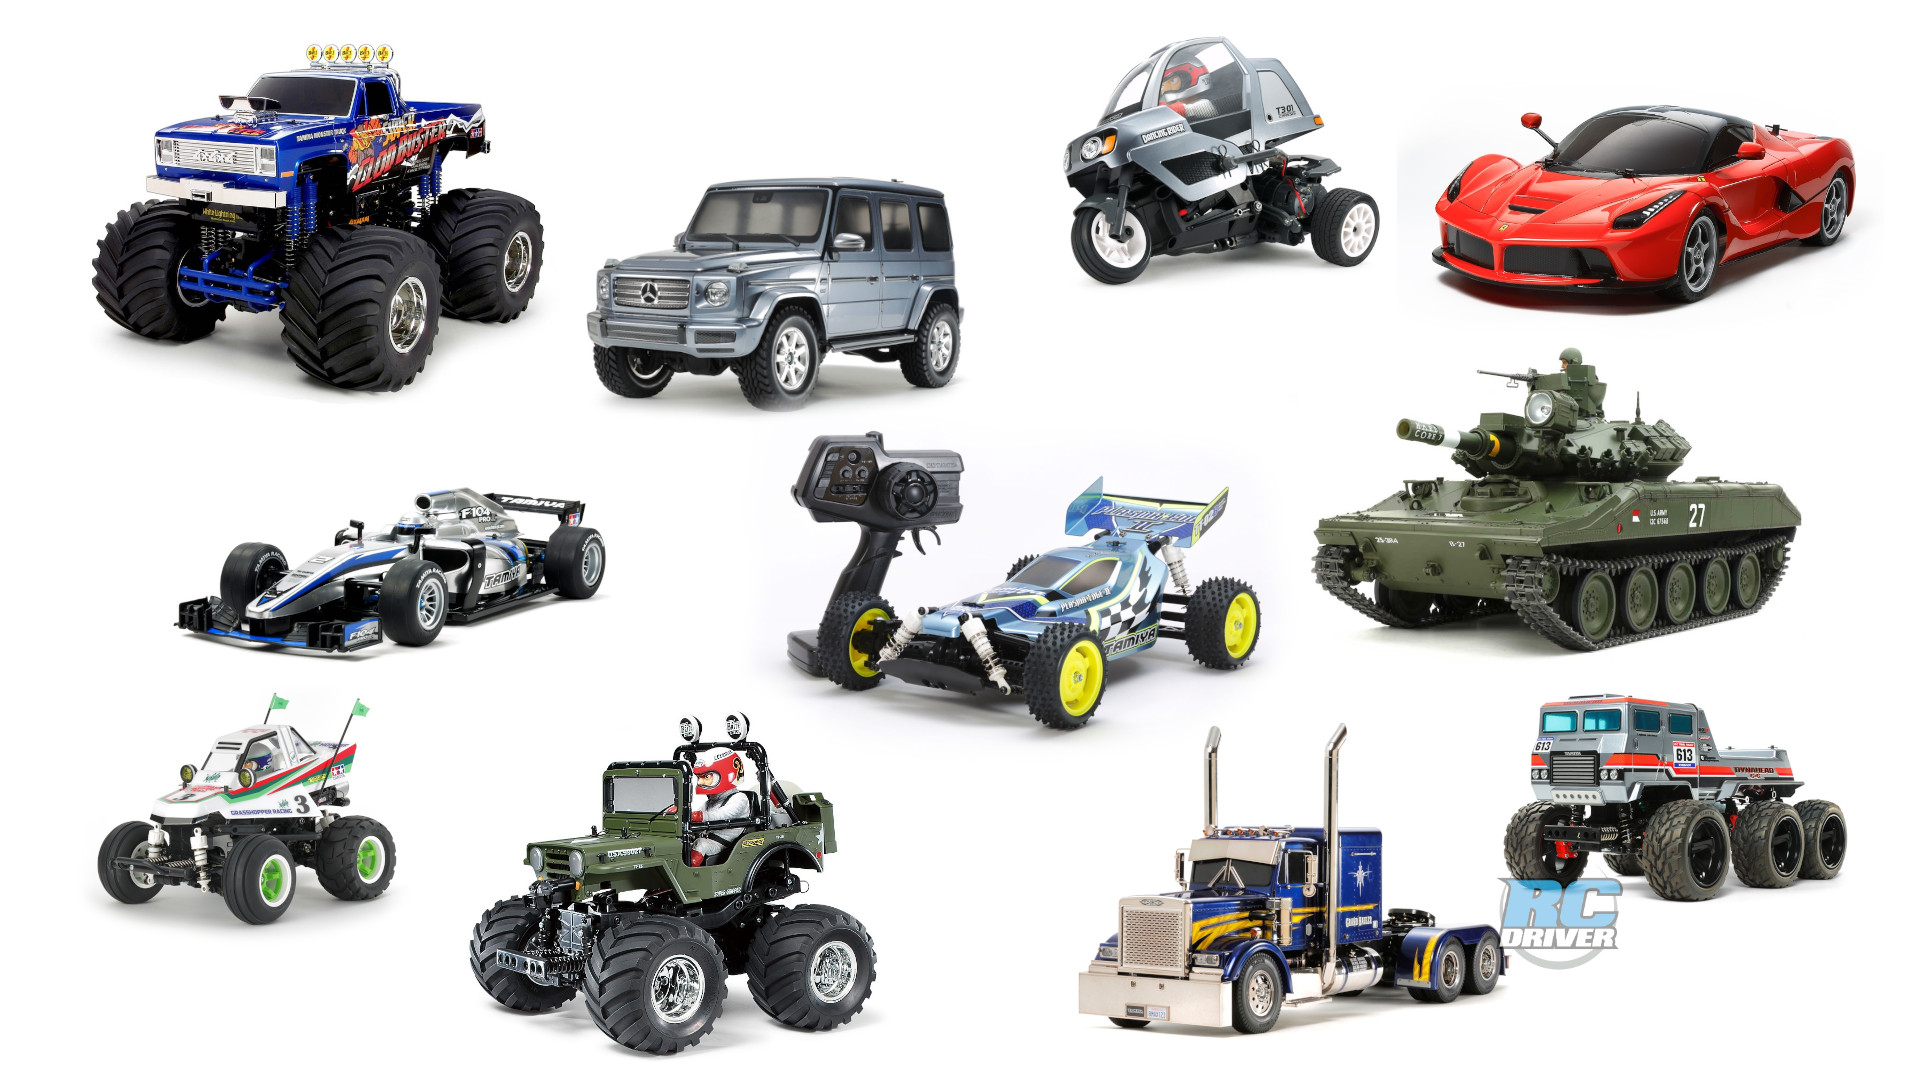 Mini Buyers Guide to select first Tamiya vehicle - RC